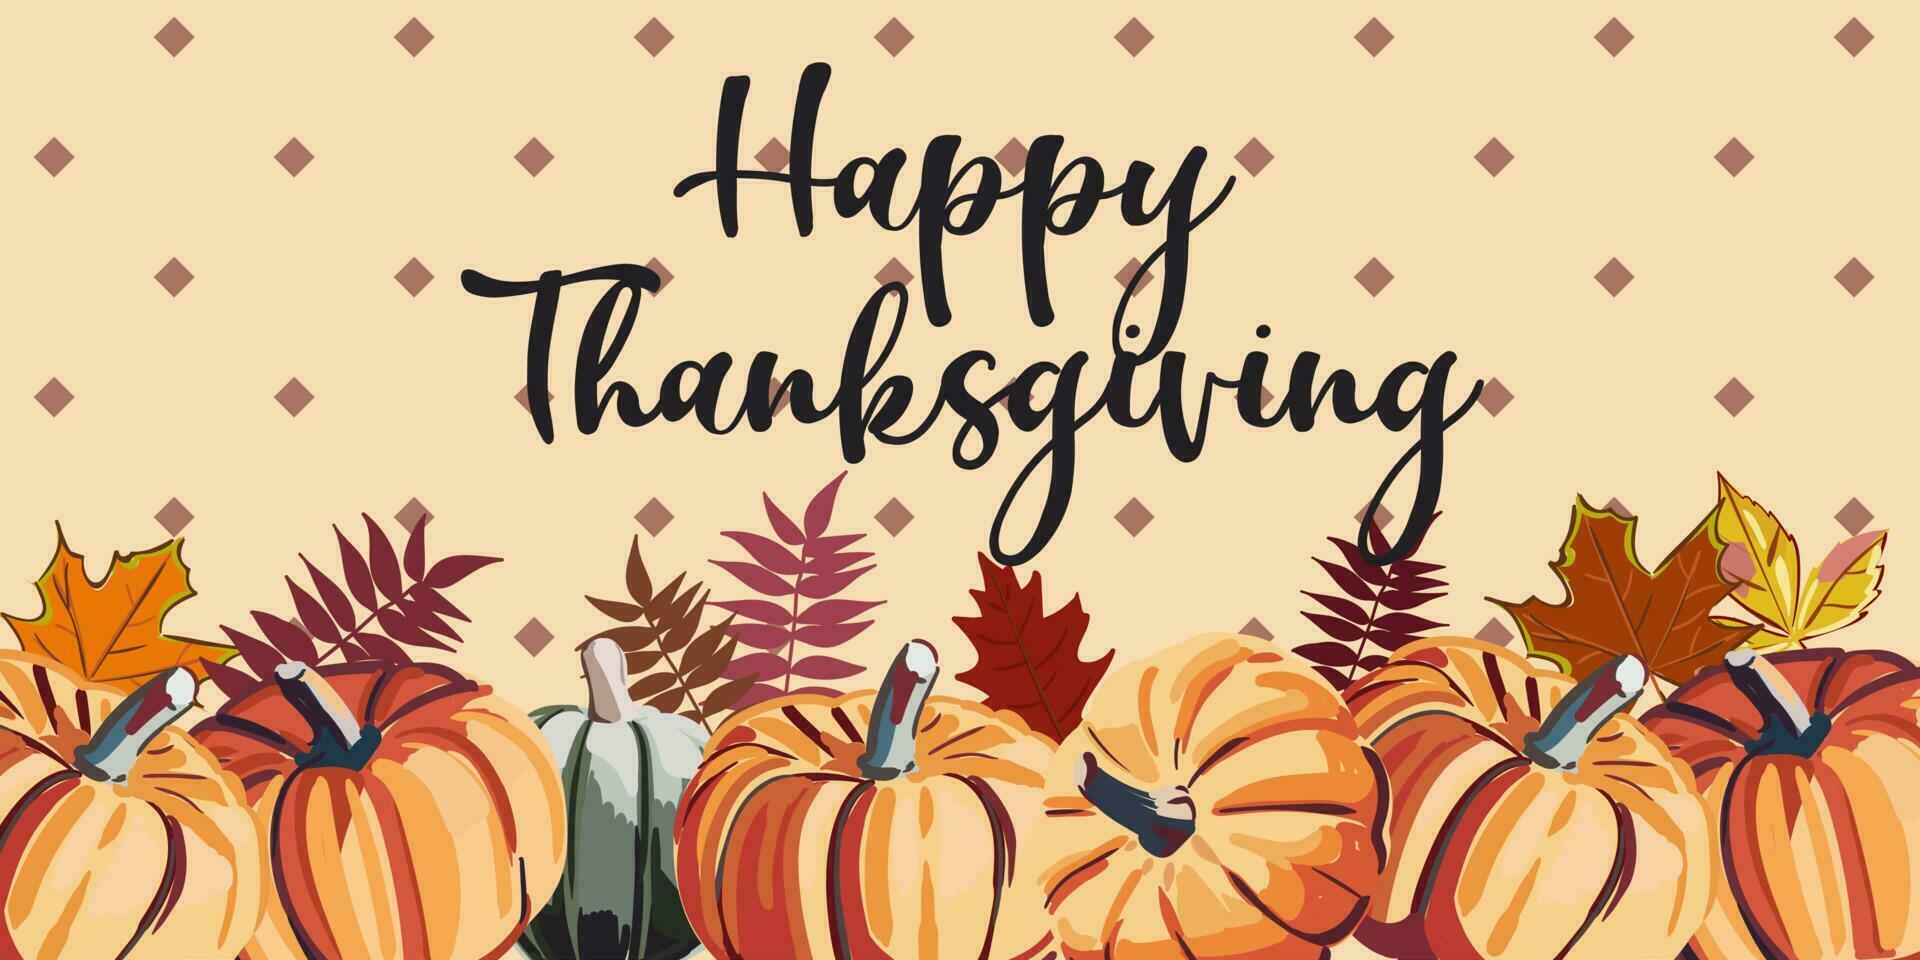 Thanksgiving day banner. Festive background with orange pumpkins, fall foliage. Horizontal holiday poster, header for website. Flat top view. Vector illustration.